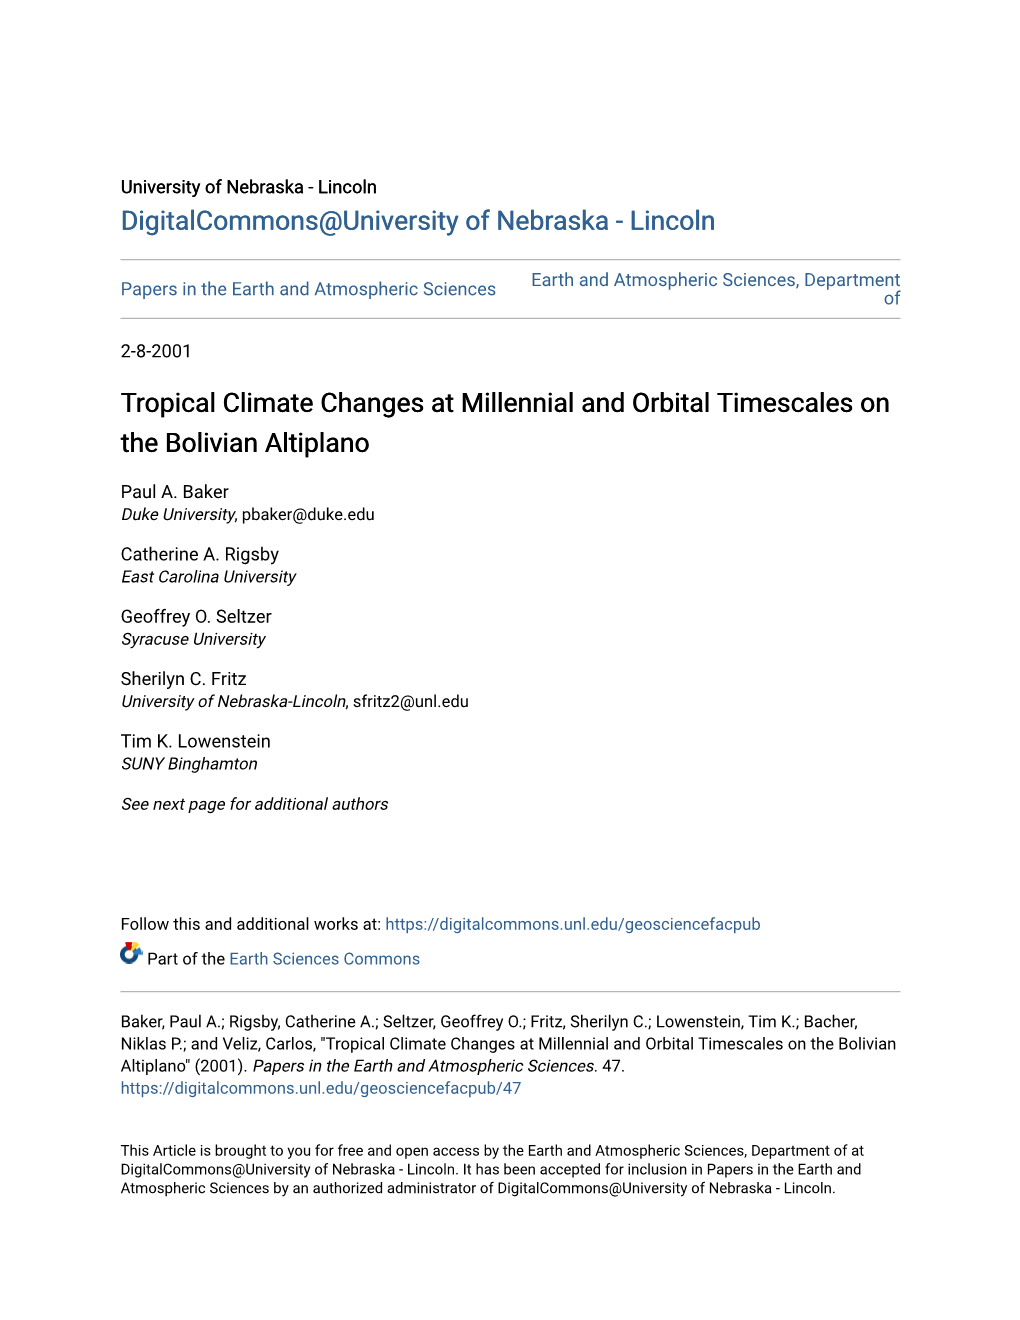 Tropical Climate Changes at Millennial and Orbital Timescales on the Bolivian Altiplano